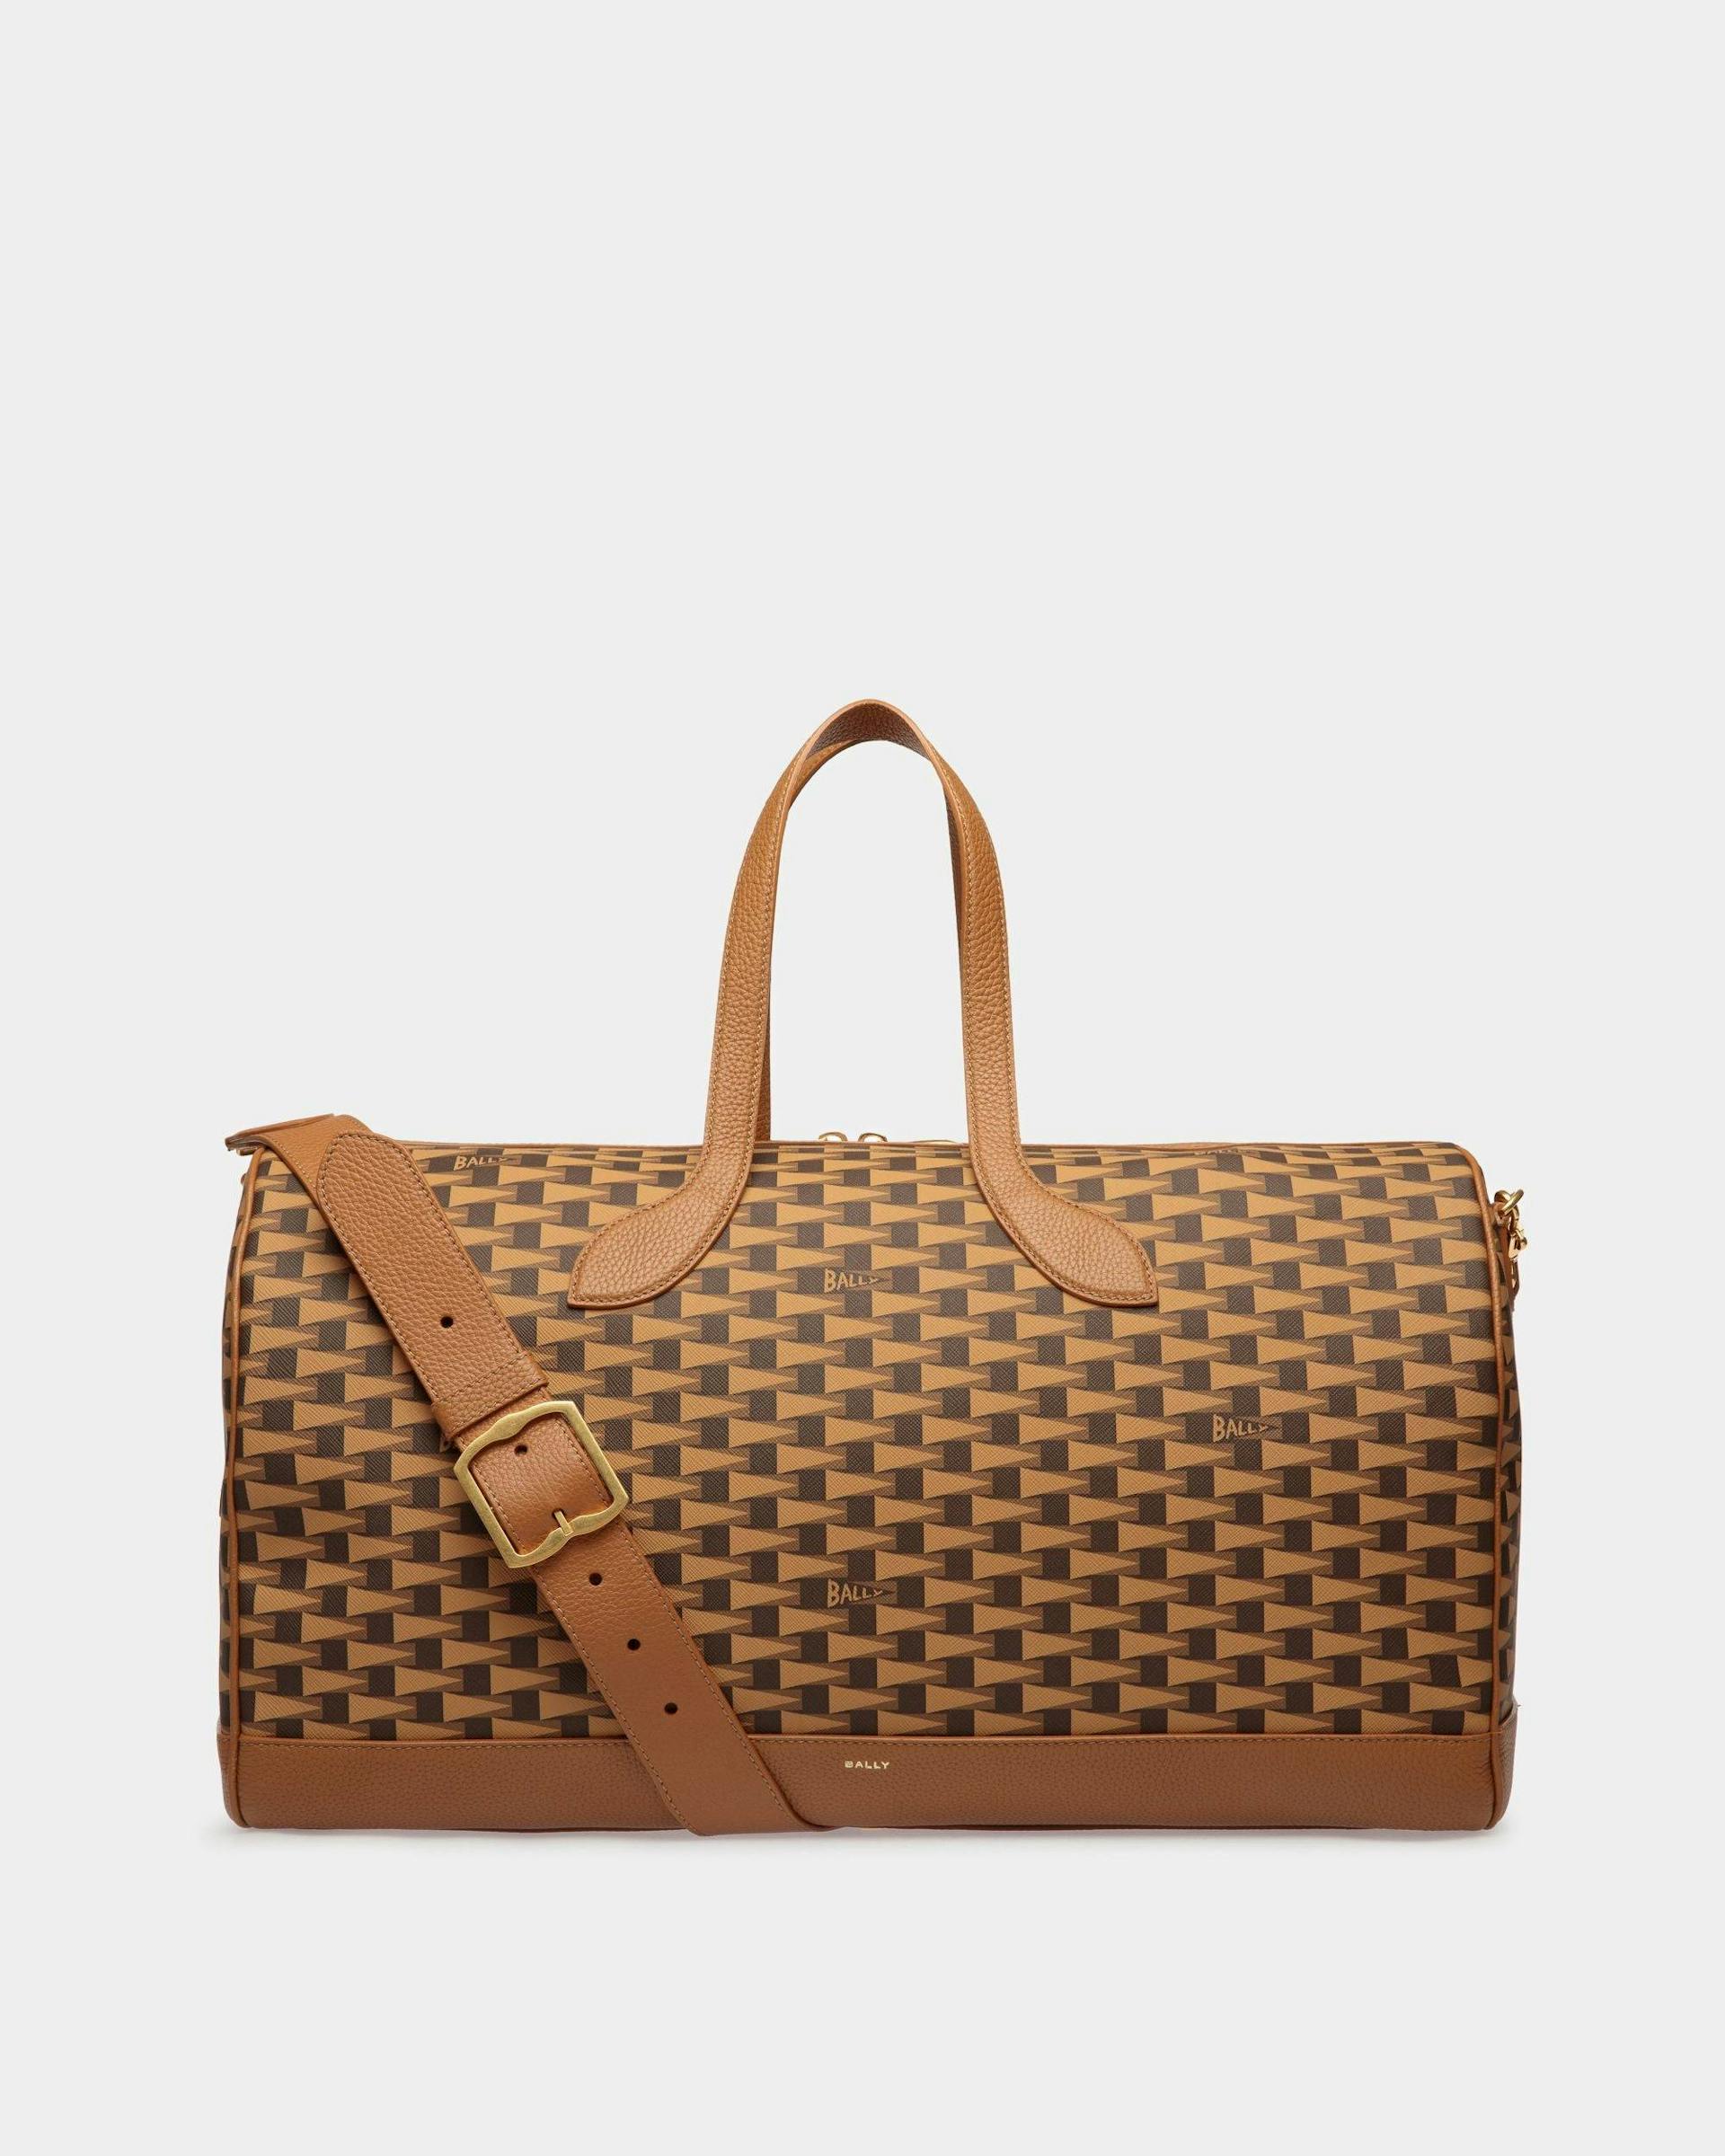 Men's Pennant Weekender In Desert TPU and leather | Bally | Still Life Front